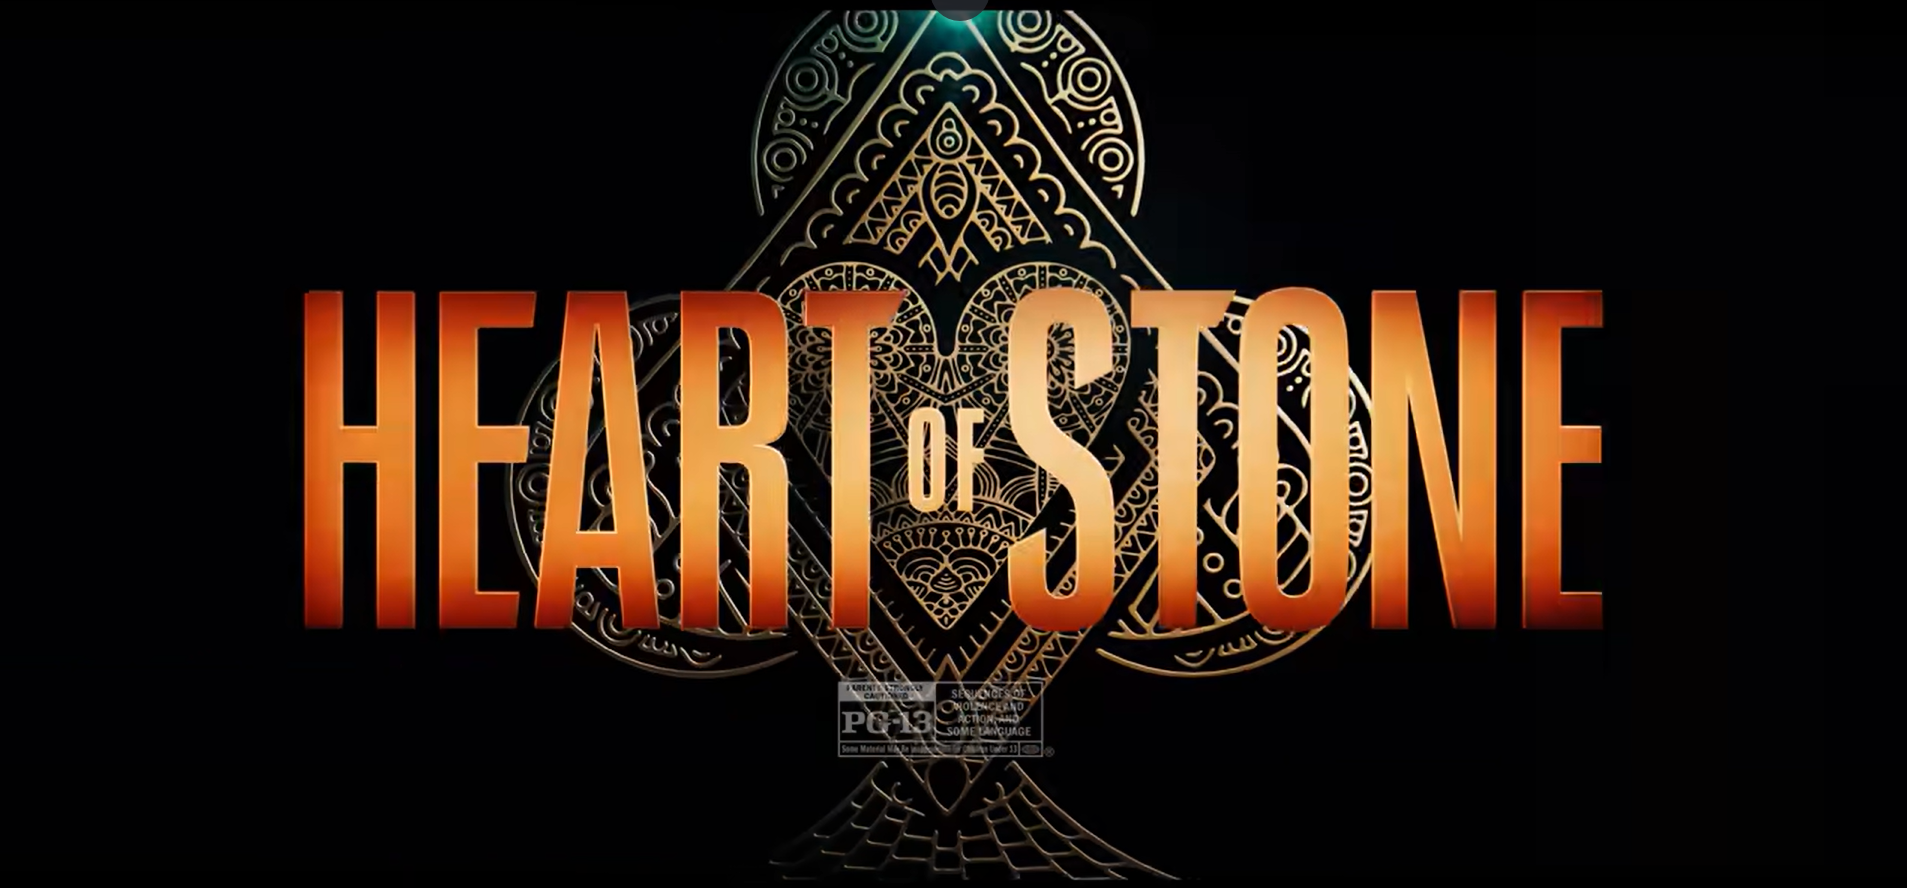 You are currently viewing Heart of Stone